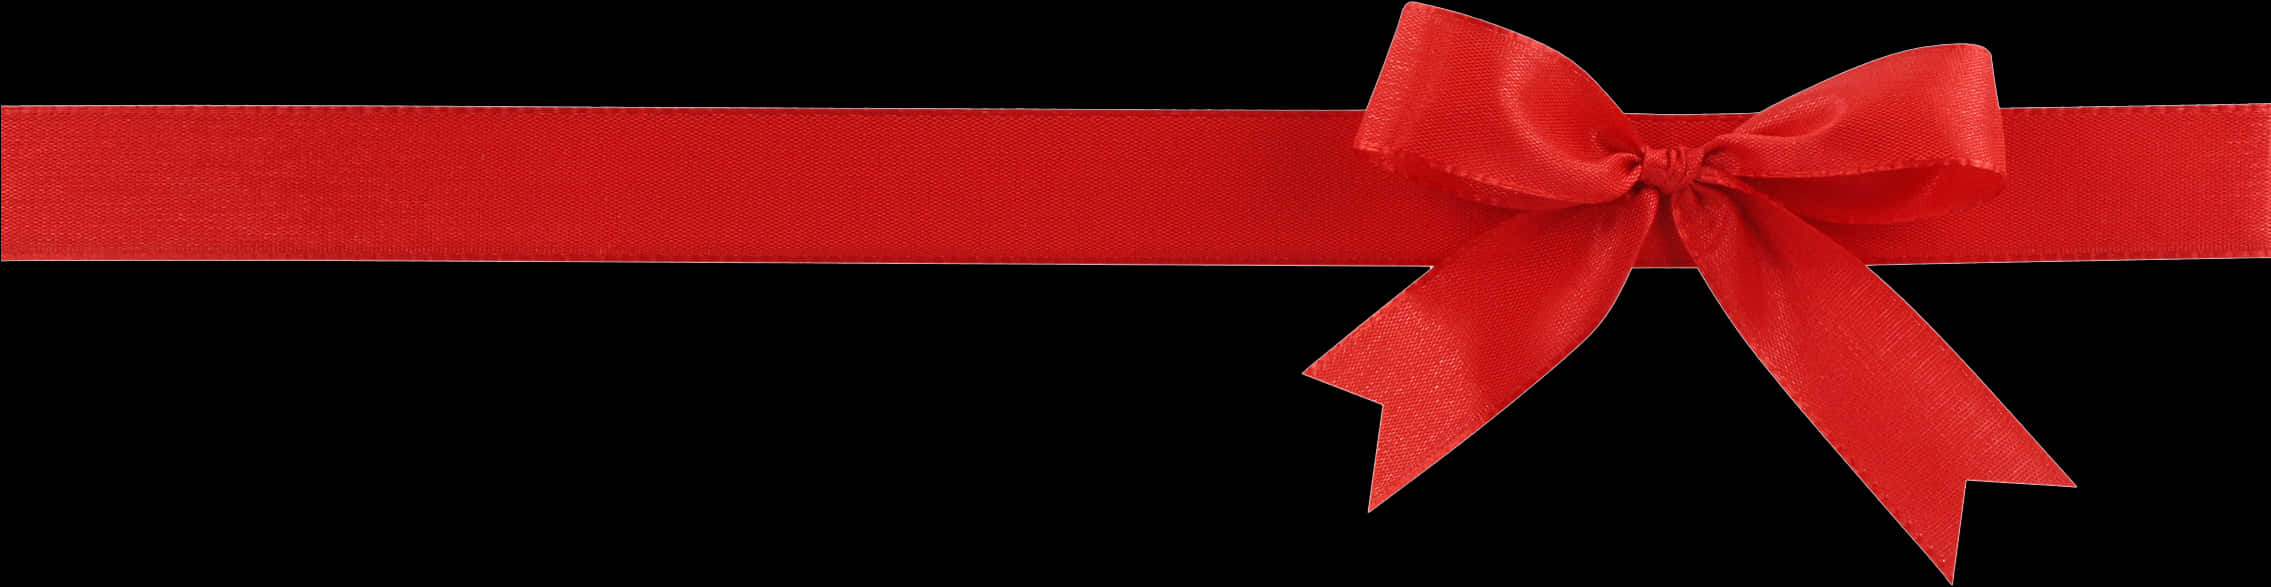 Red Ribbon Bow Black Background